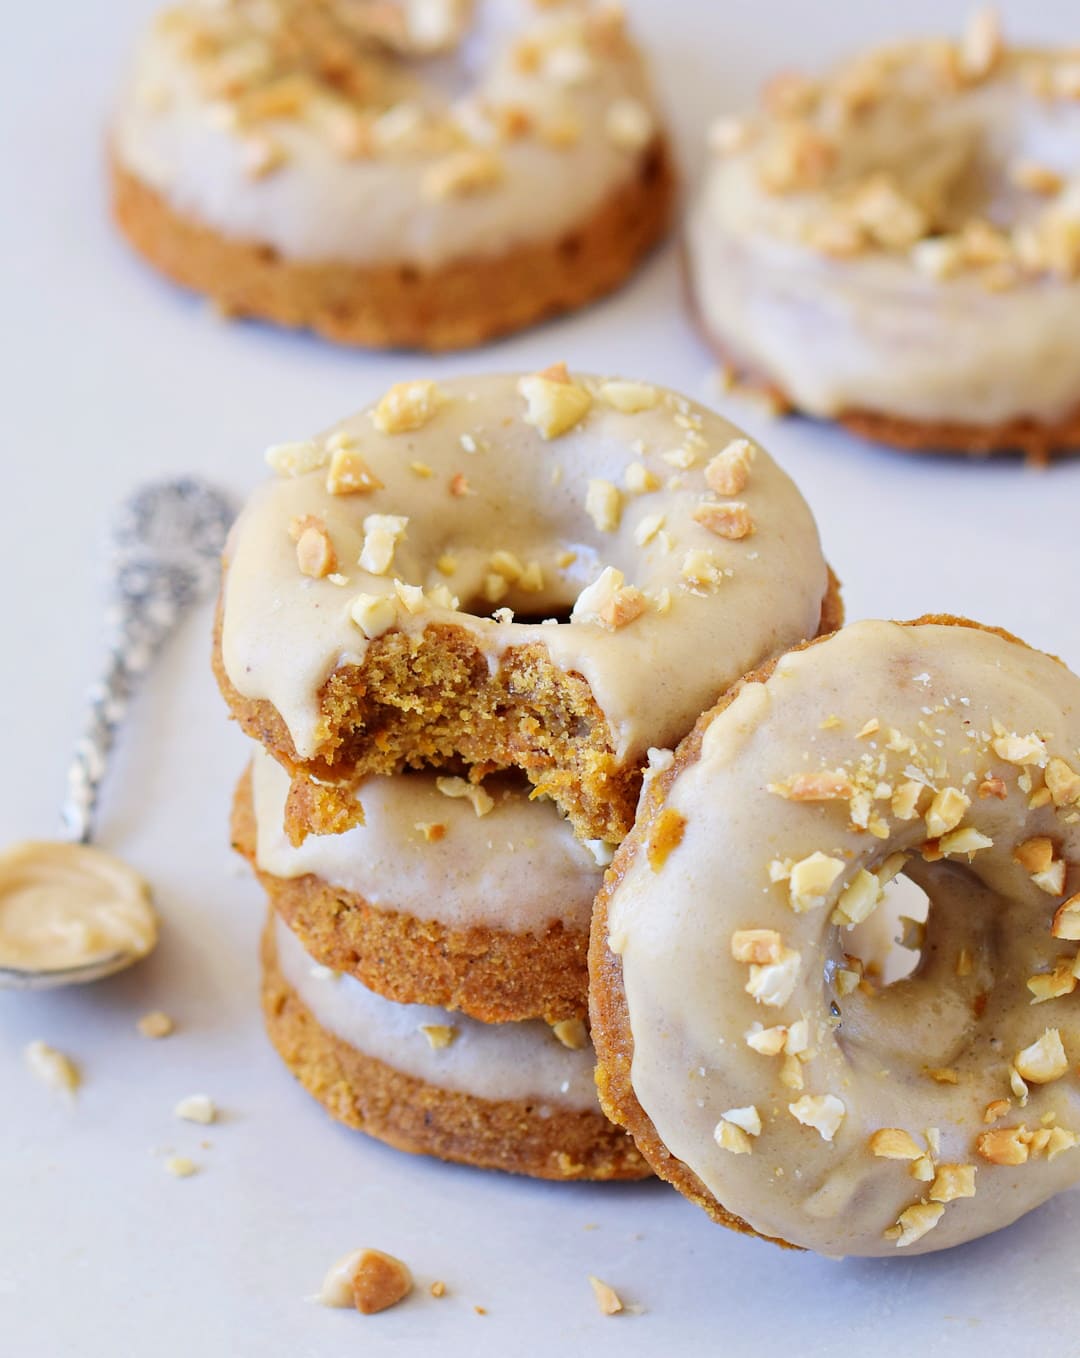 vegan carrot cake donuts with gingerbread flavor and frosting gluten-free